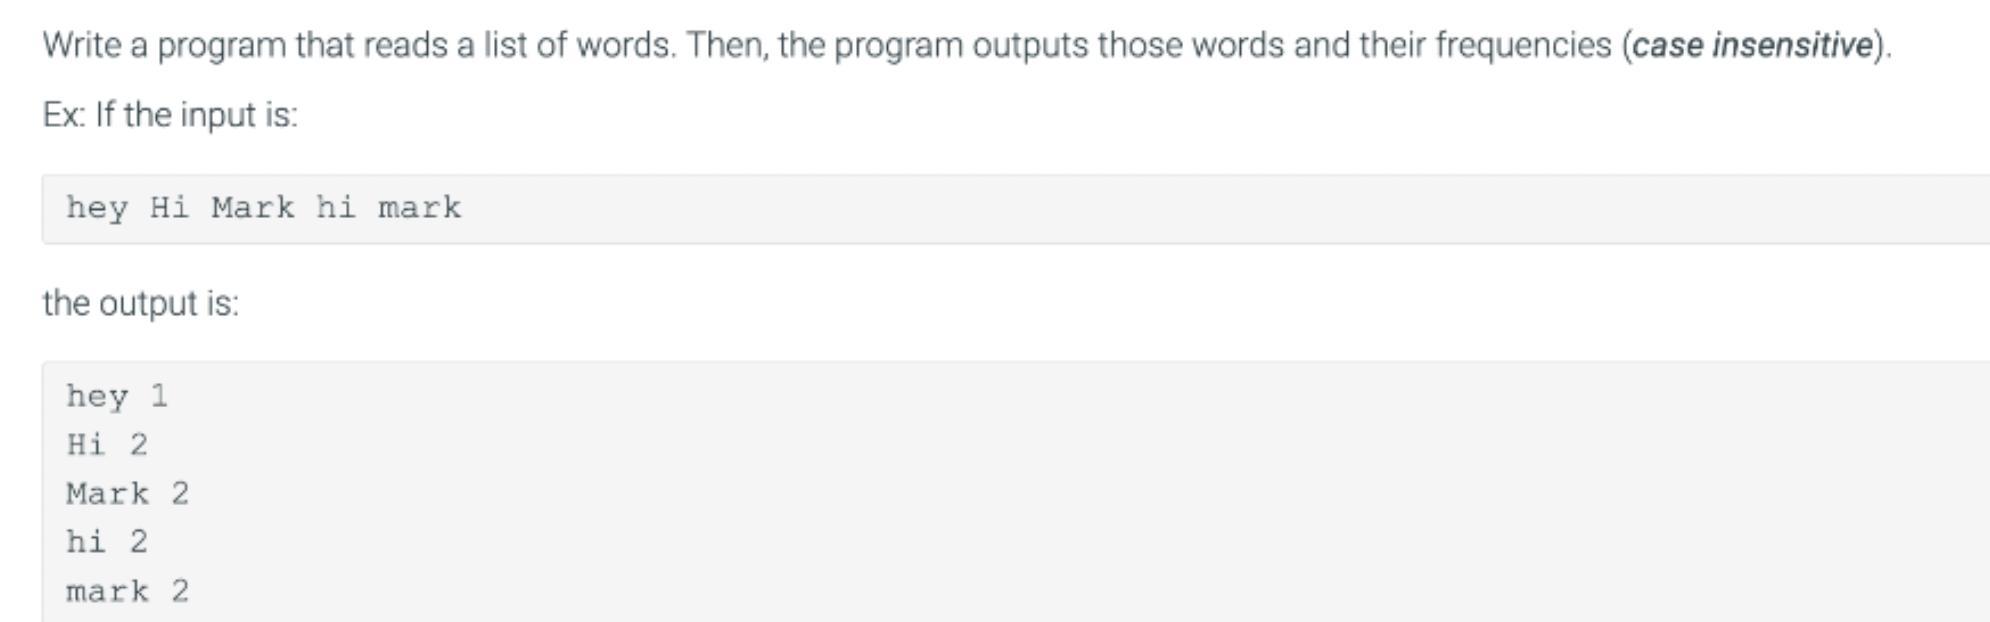 Write A Program That Reads A List Of Words. Then, The Program Outputs Those Words And Their Frequencies